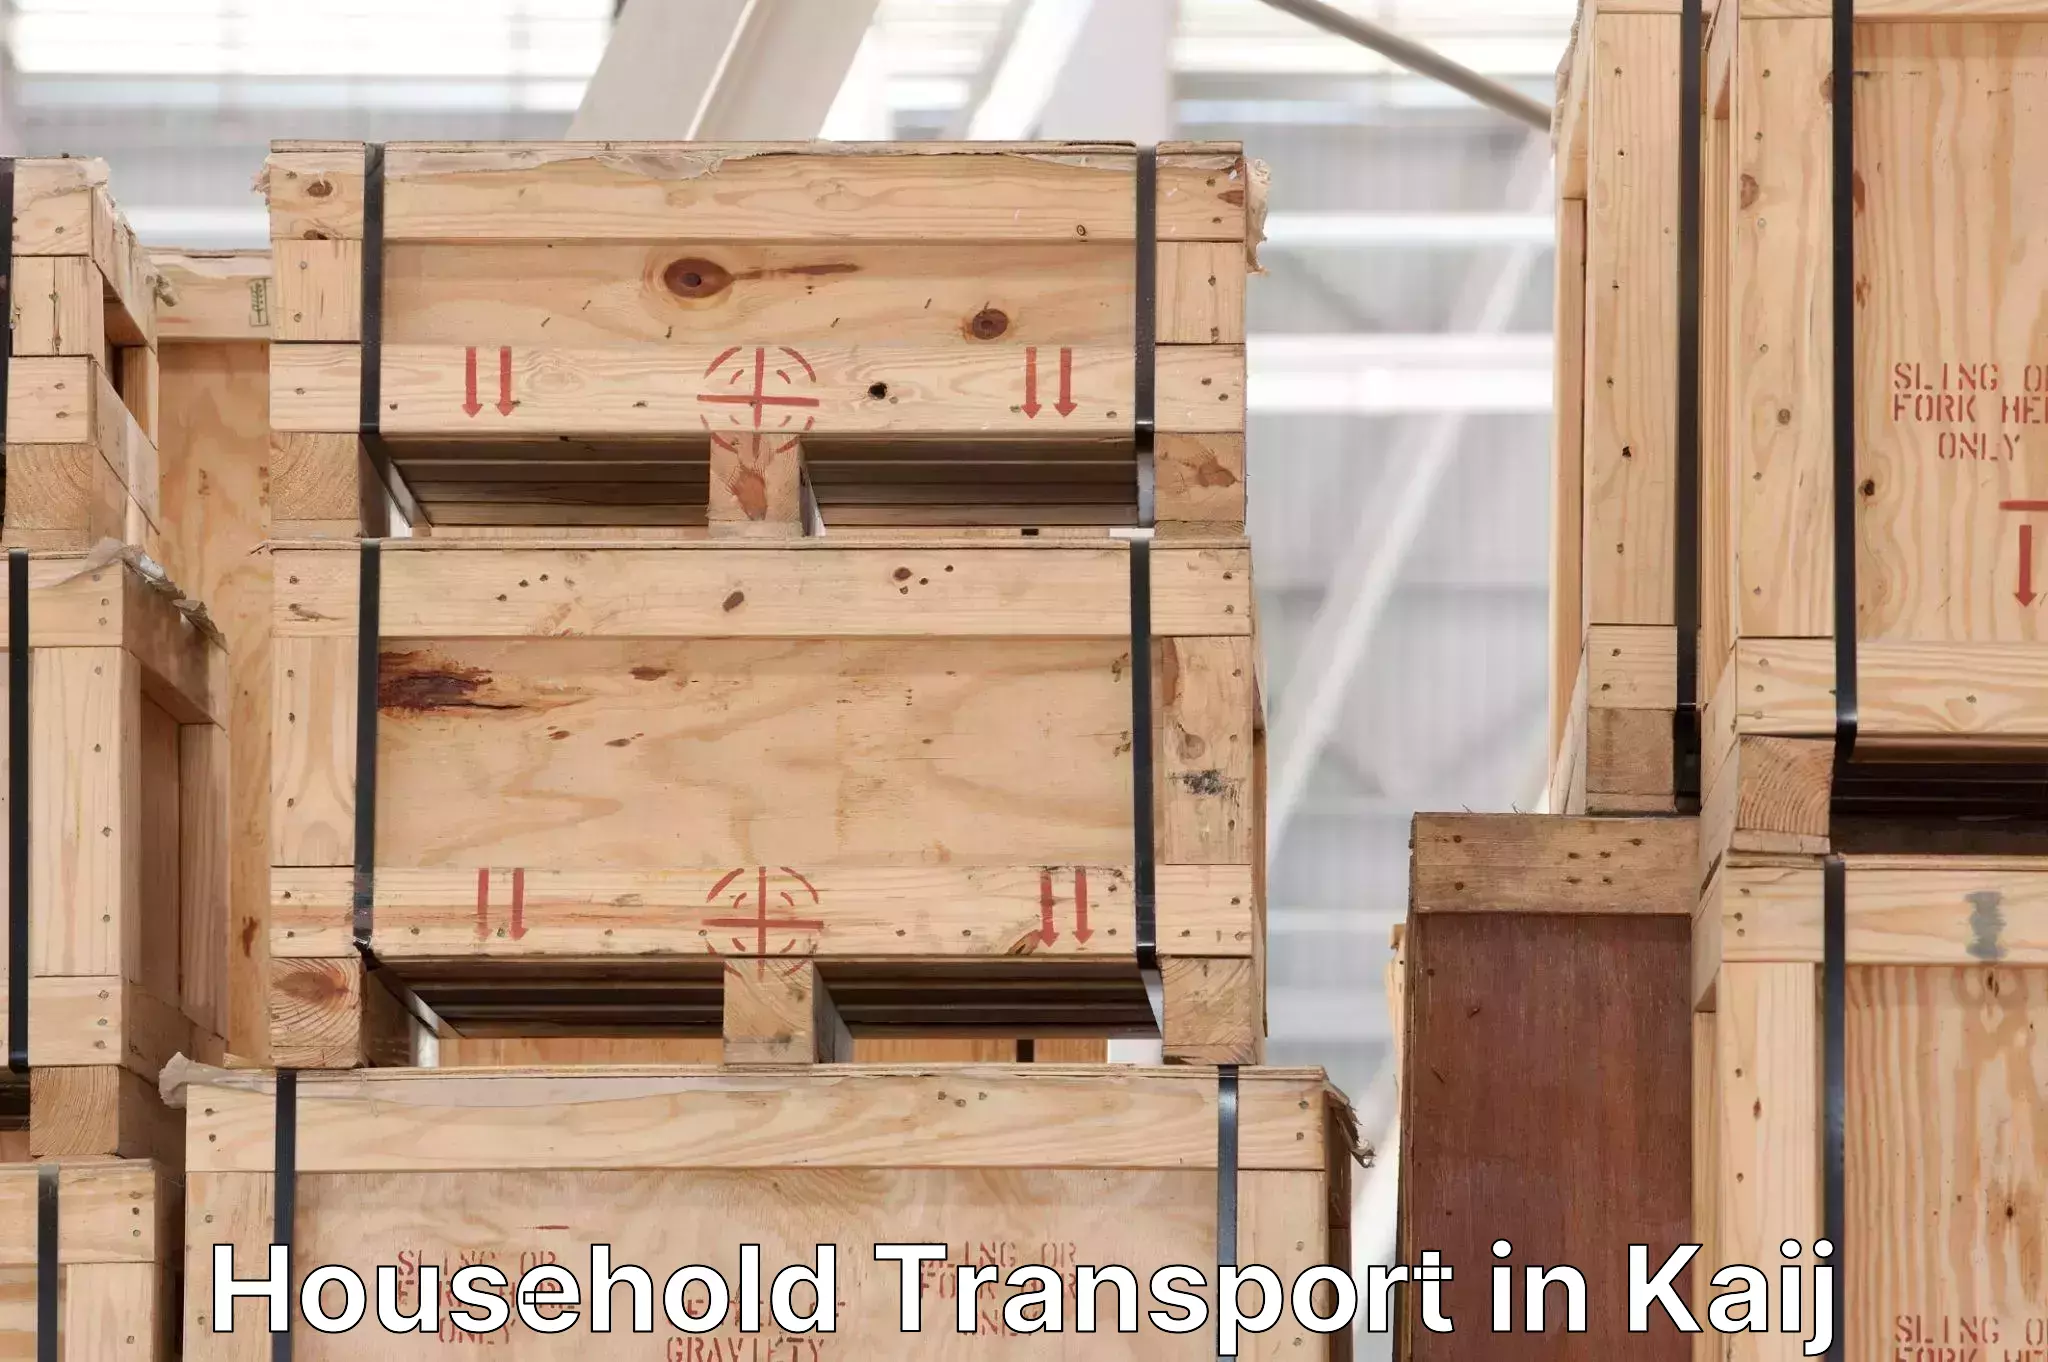 Household transport services in Kaij